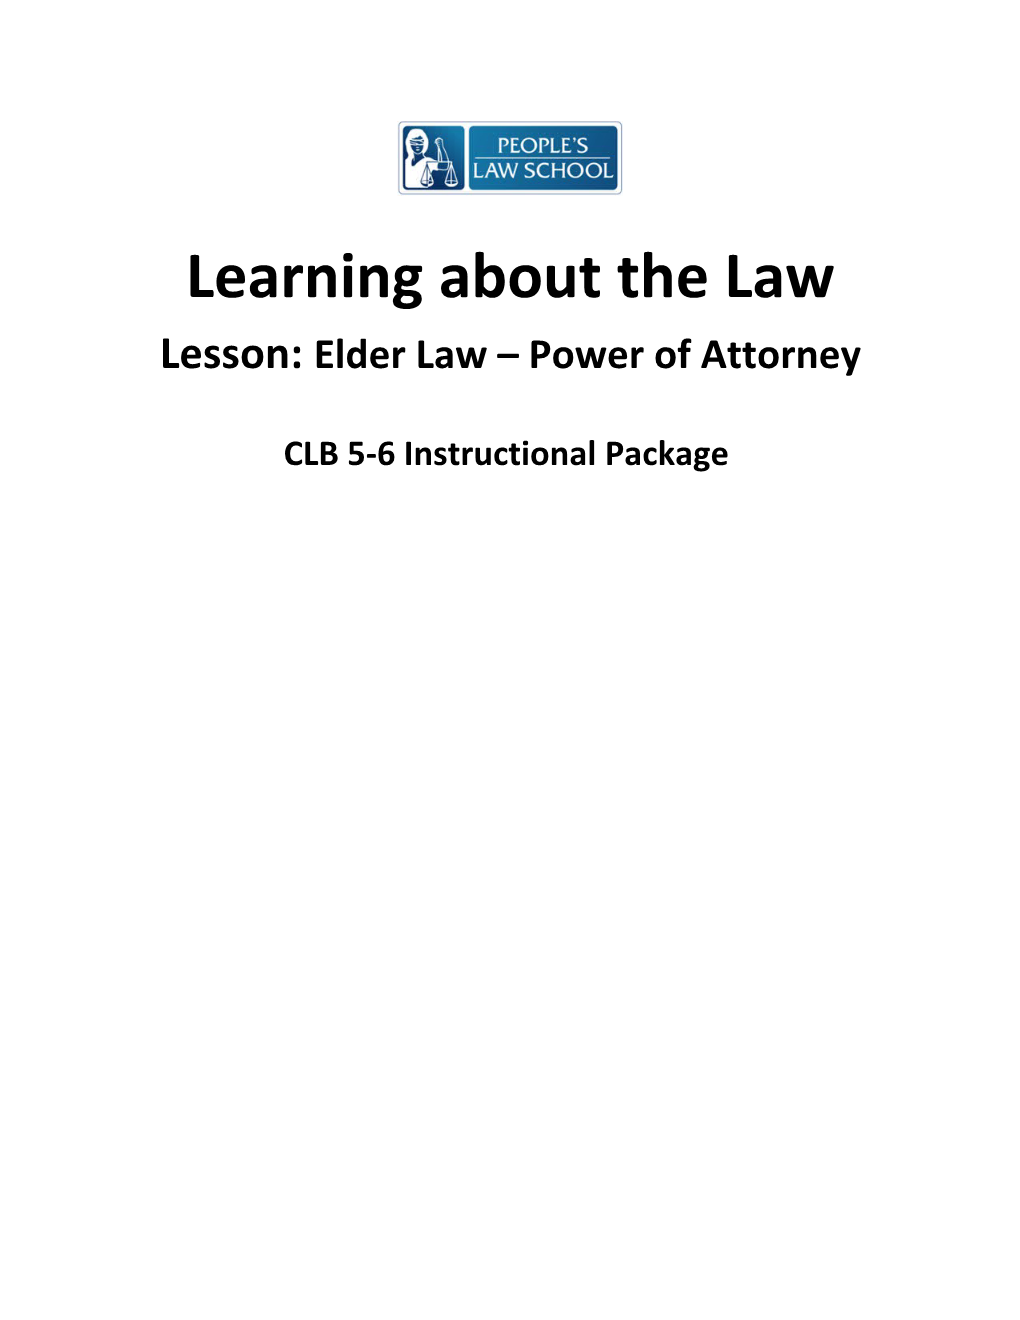 Learning About the Law Lesson: Elder Law Power of Attorney